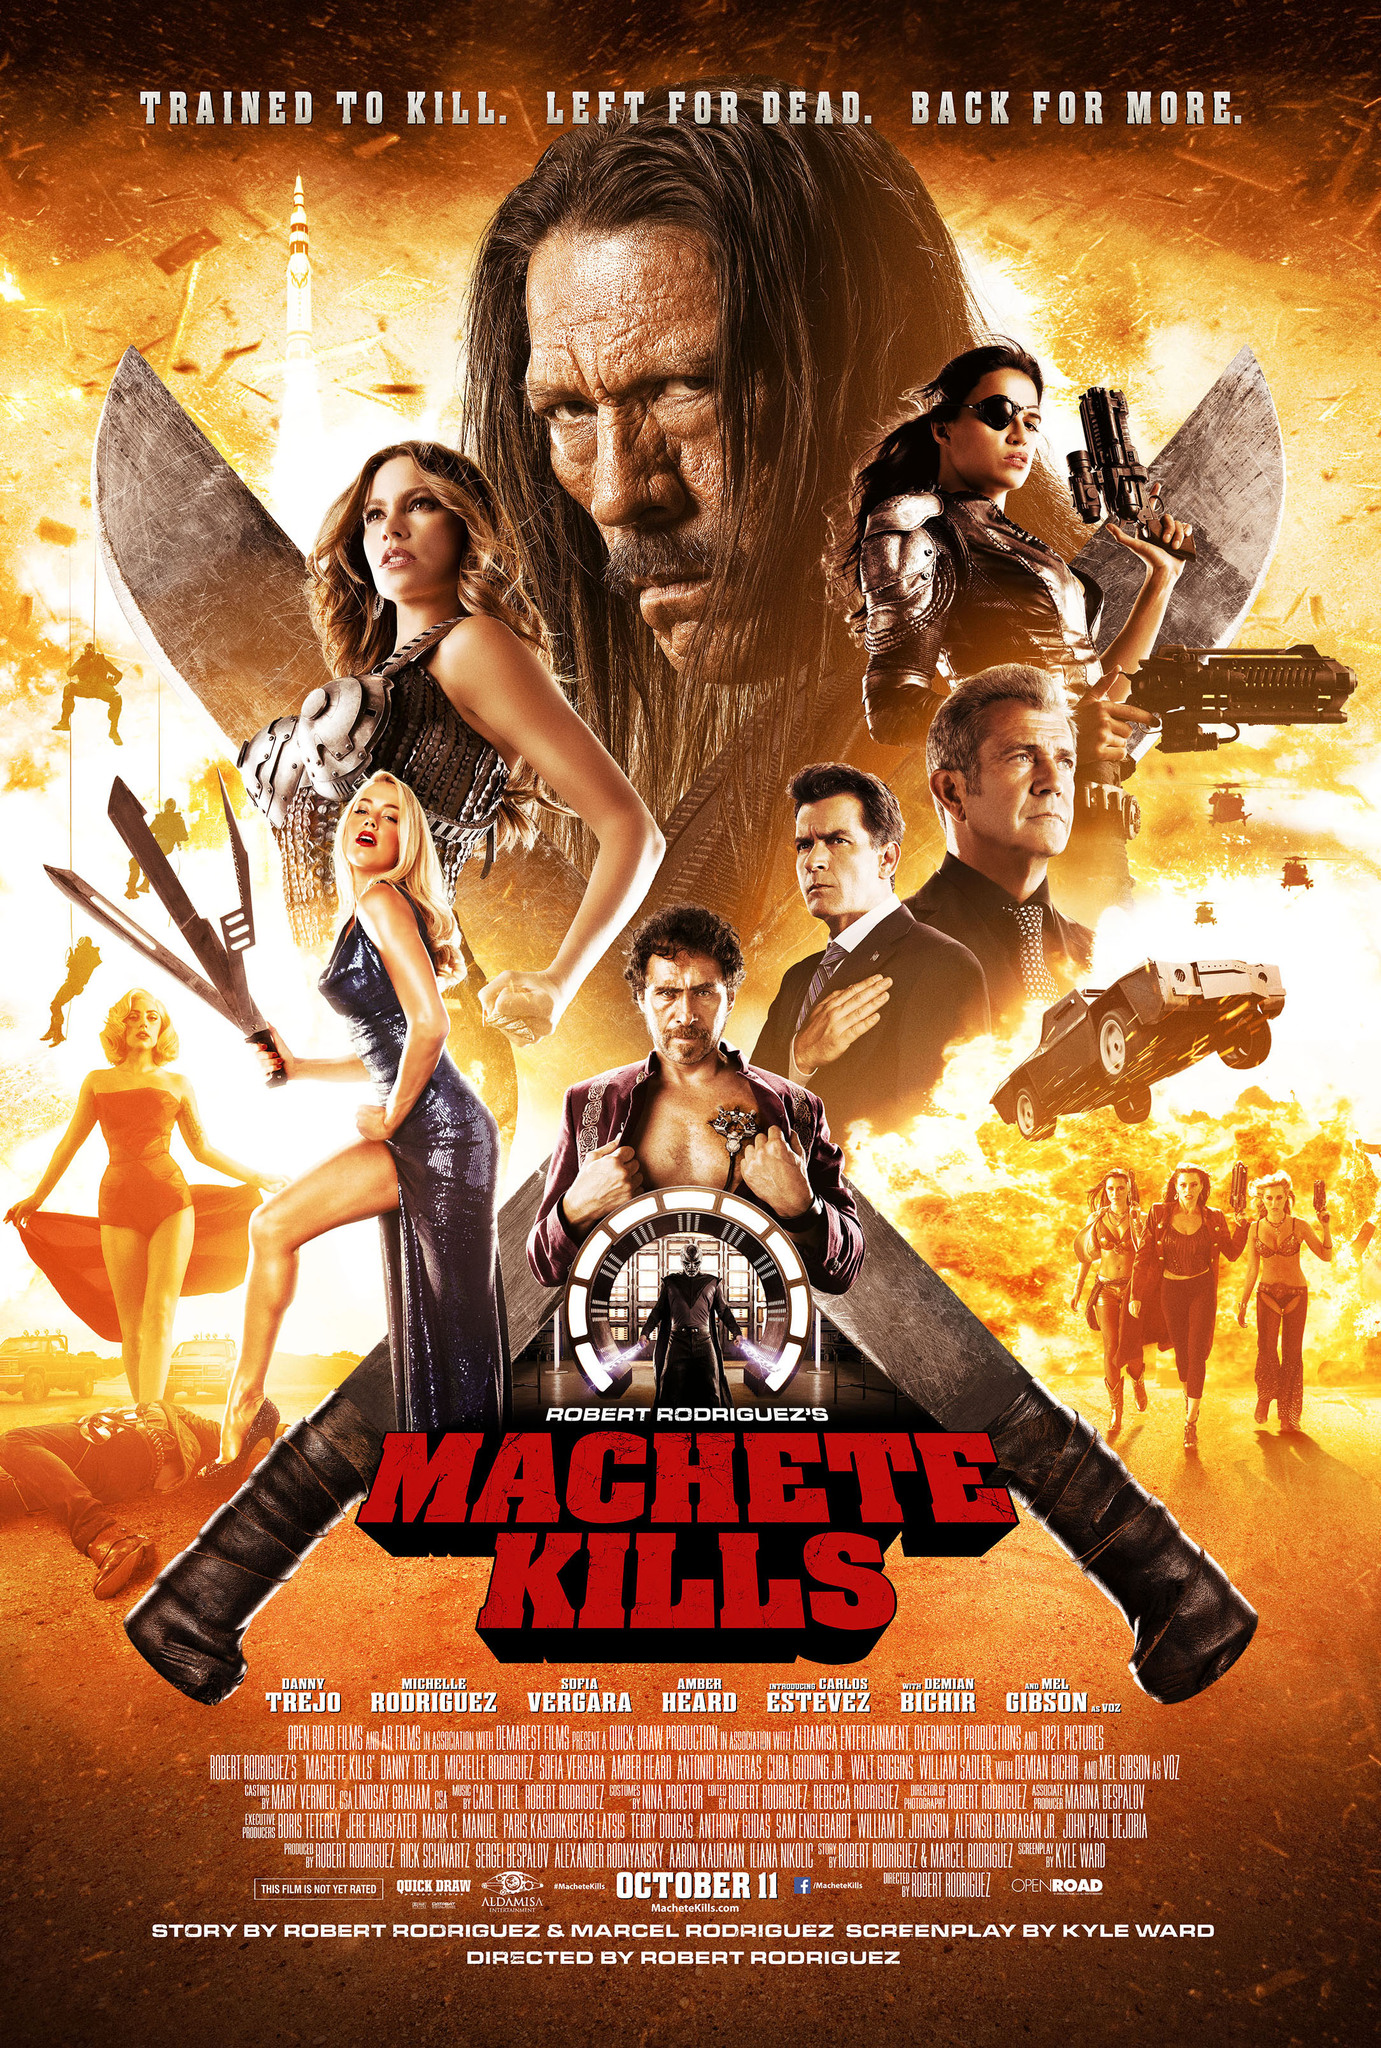 Machete is recruited by the government of the United States of America to take down an arms dealer in Mexico who is out to instigate a global war.